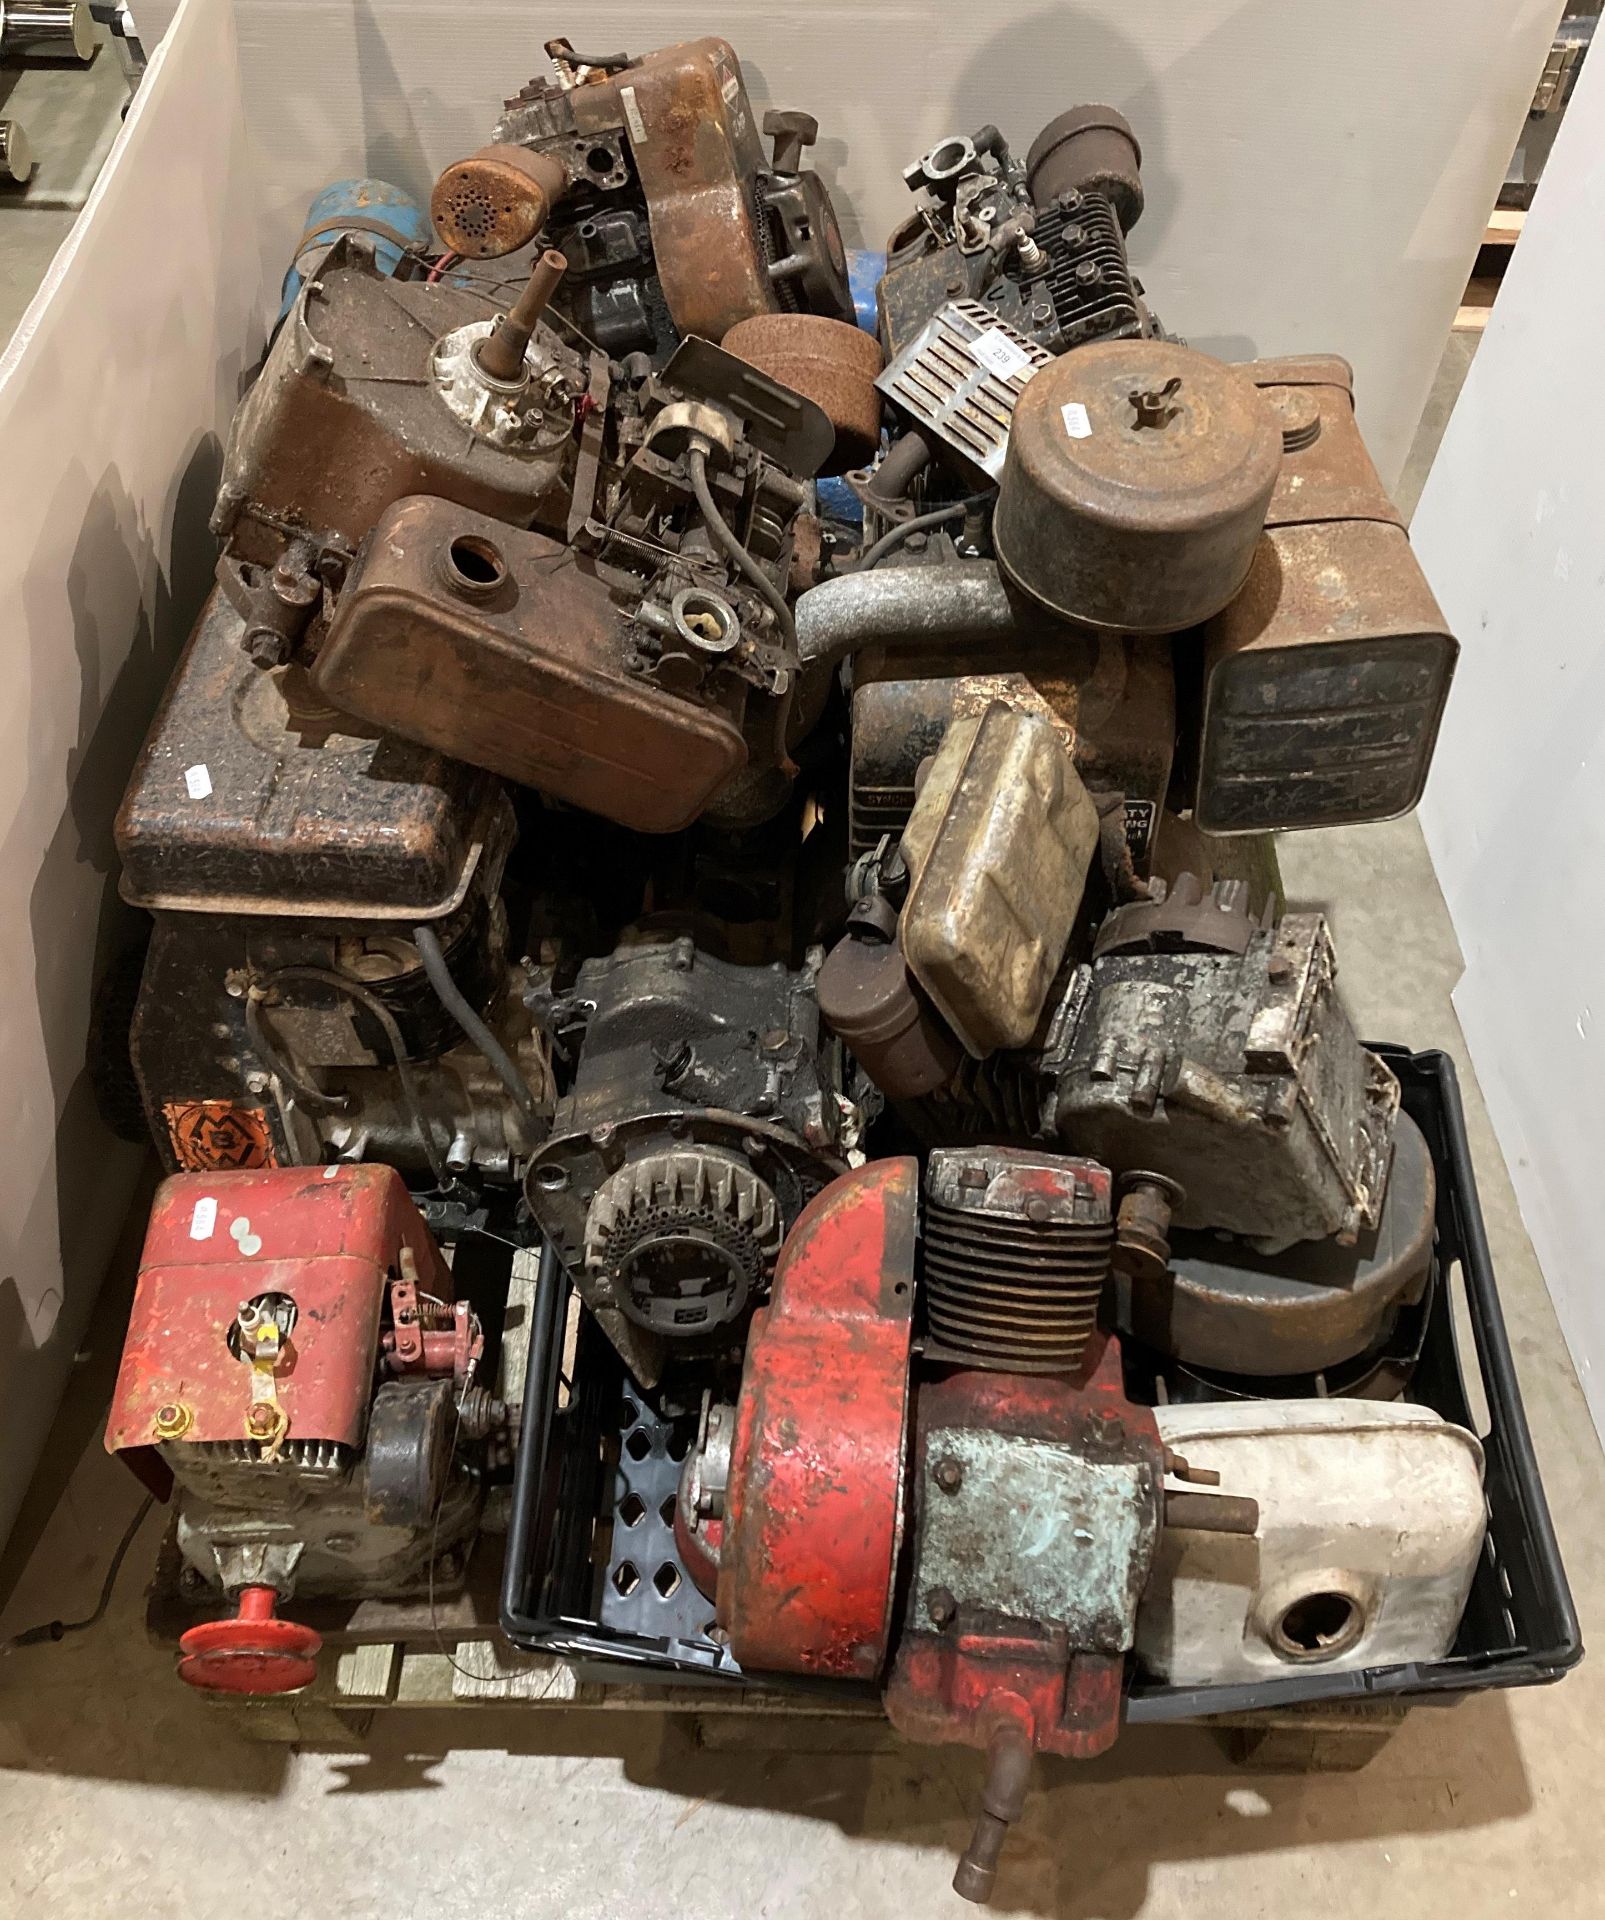 Contents to pallet - assorted engines including air cooled engine, Briggs & Stratton 3HP,